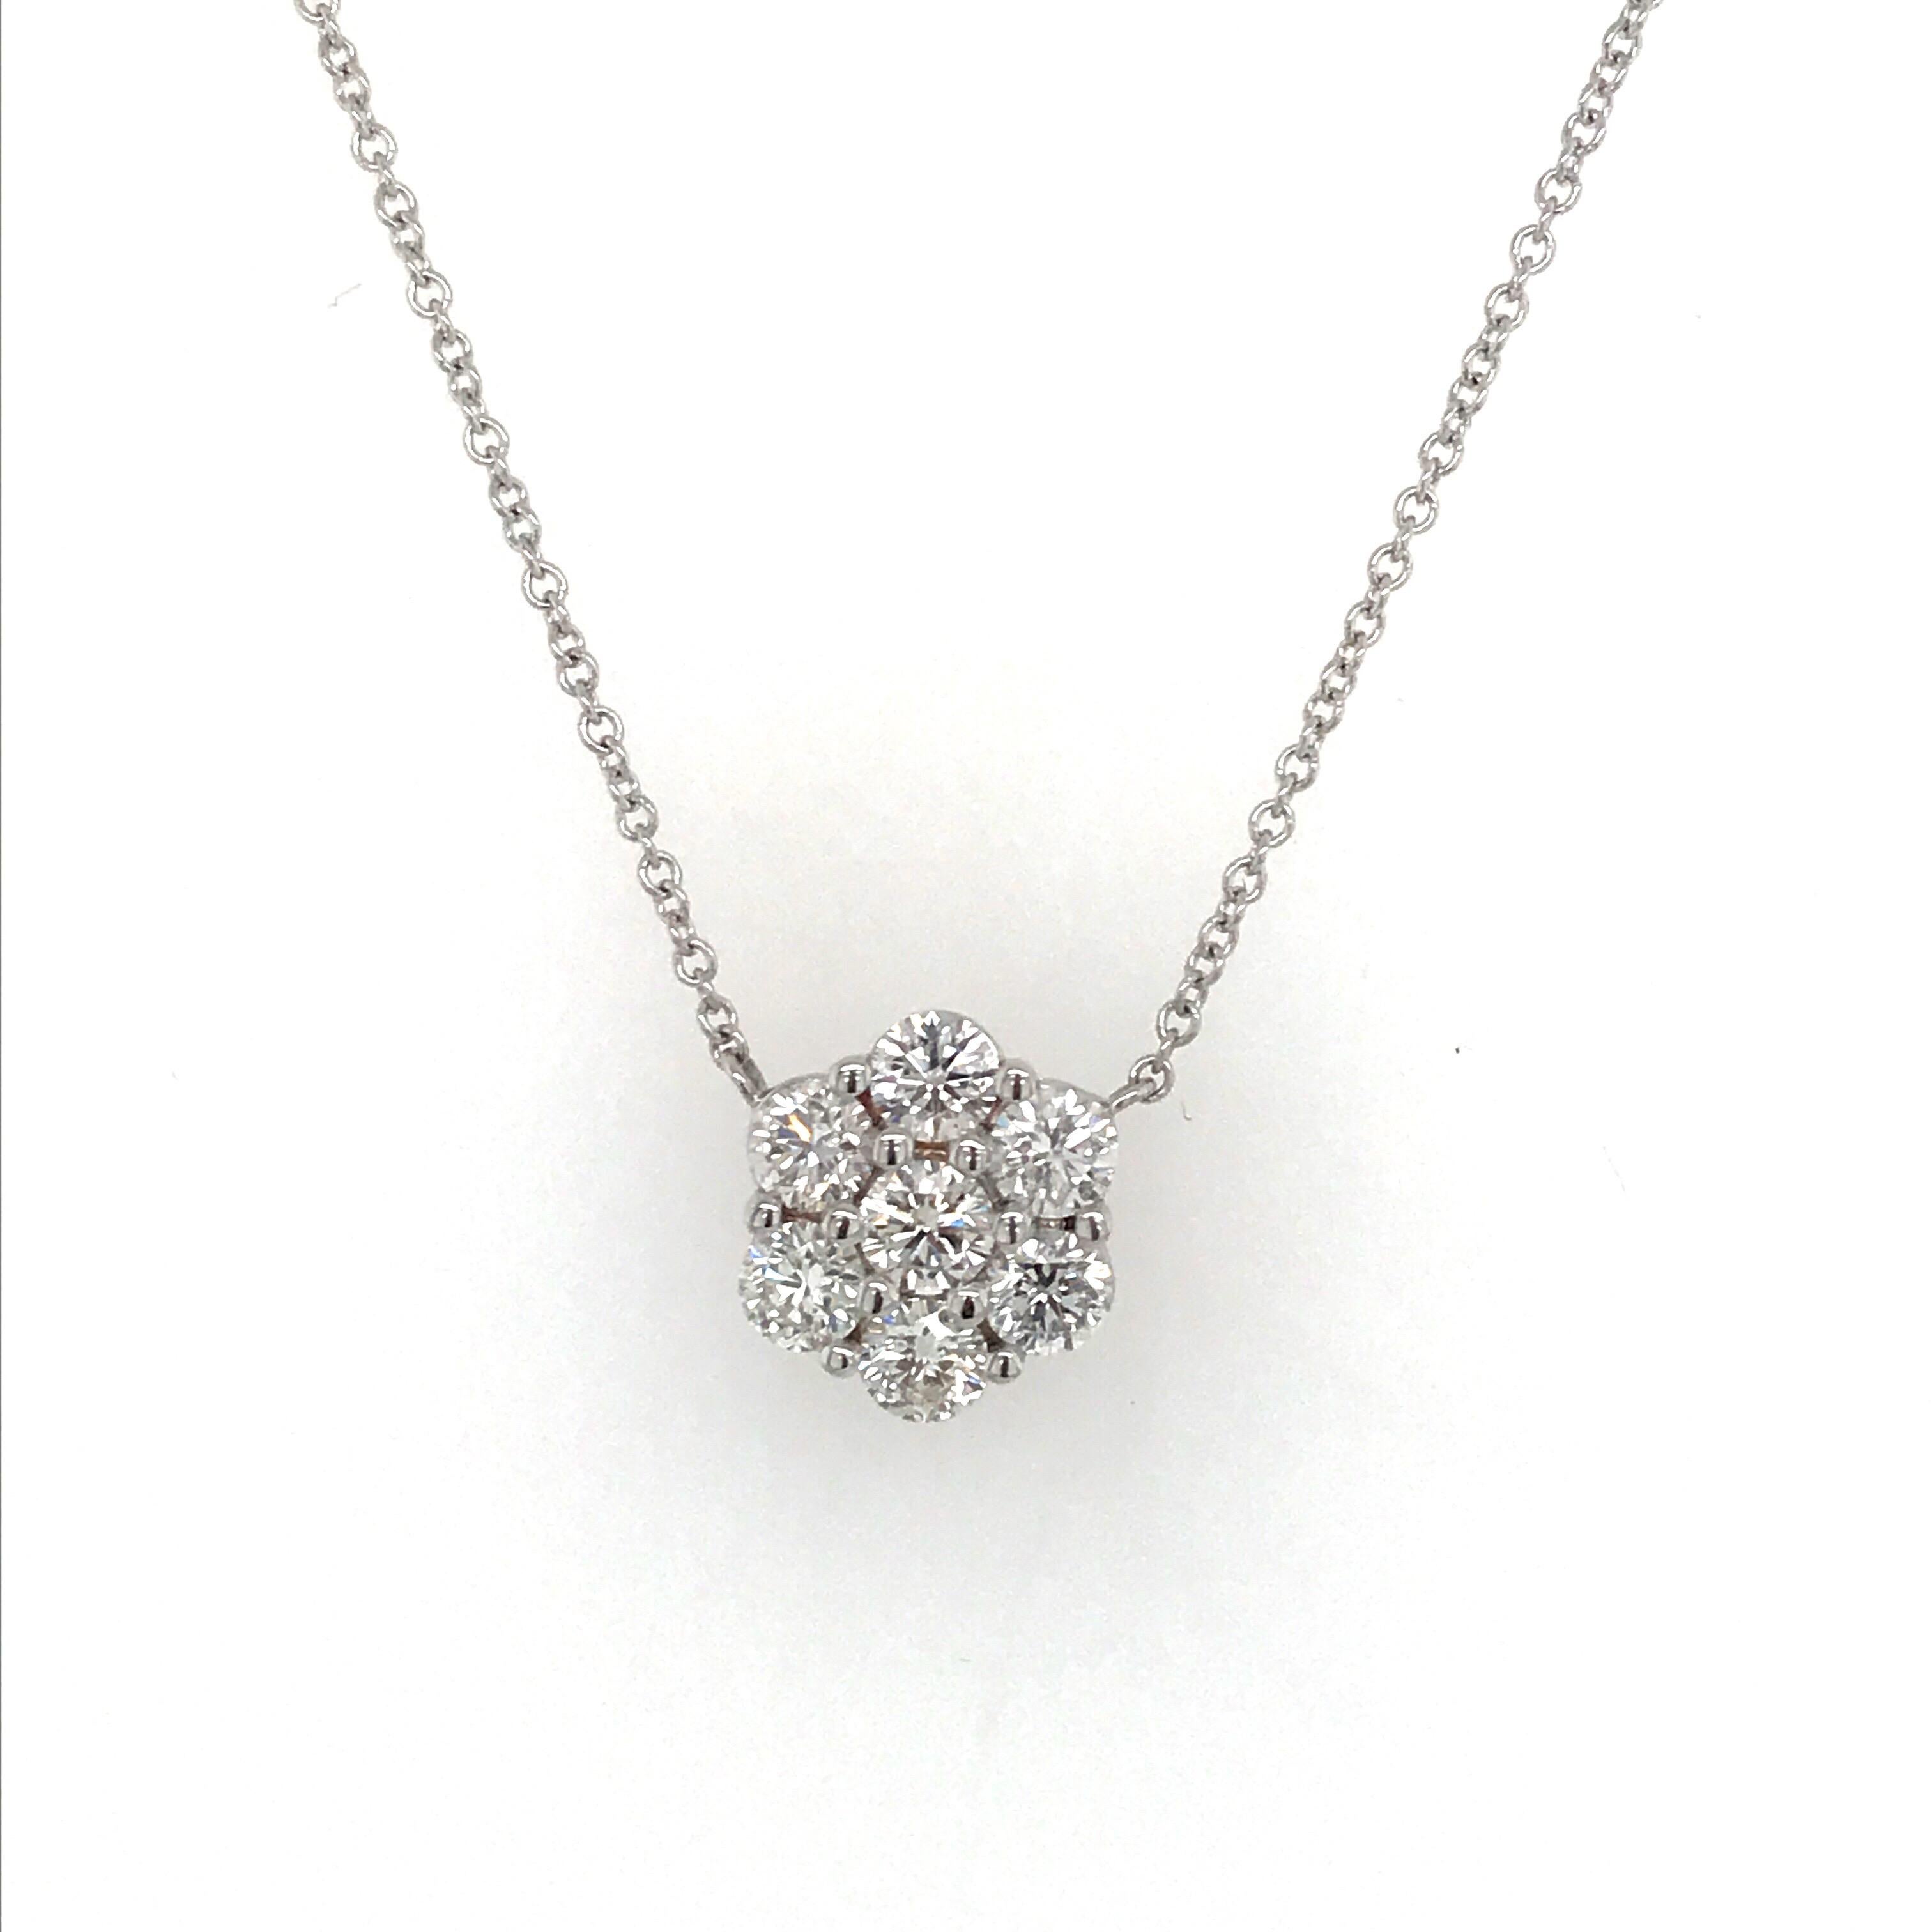 18K White Gold diamond cluster pendant featuring 7 round brilliants weighing 0.79 carats extended on a 16 inch chain. 
A timeless piece of jewelry. 
Also available in earrings. 
Color: H
Clarity SI1